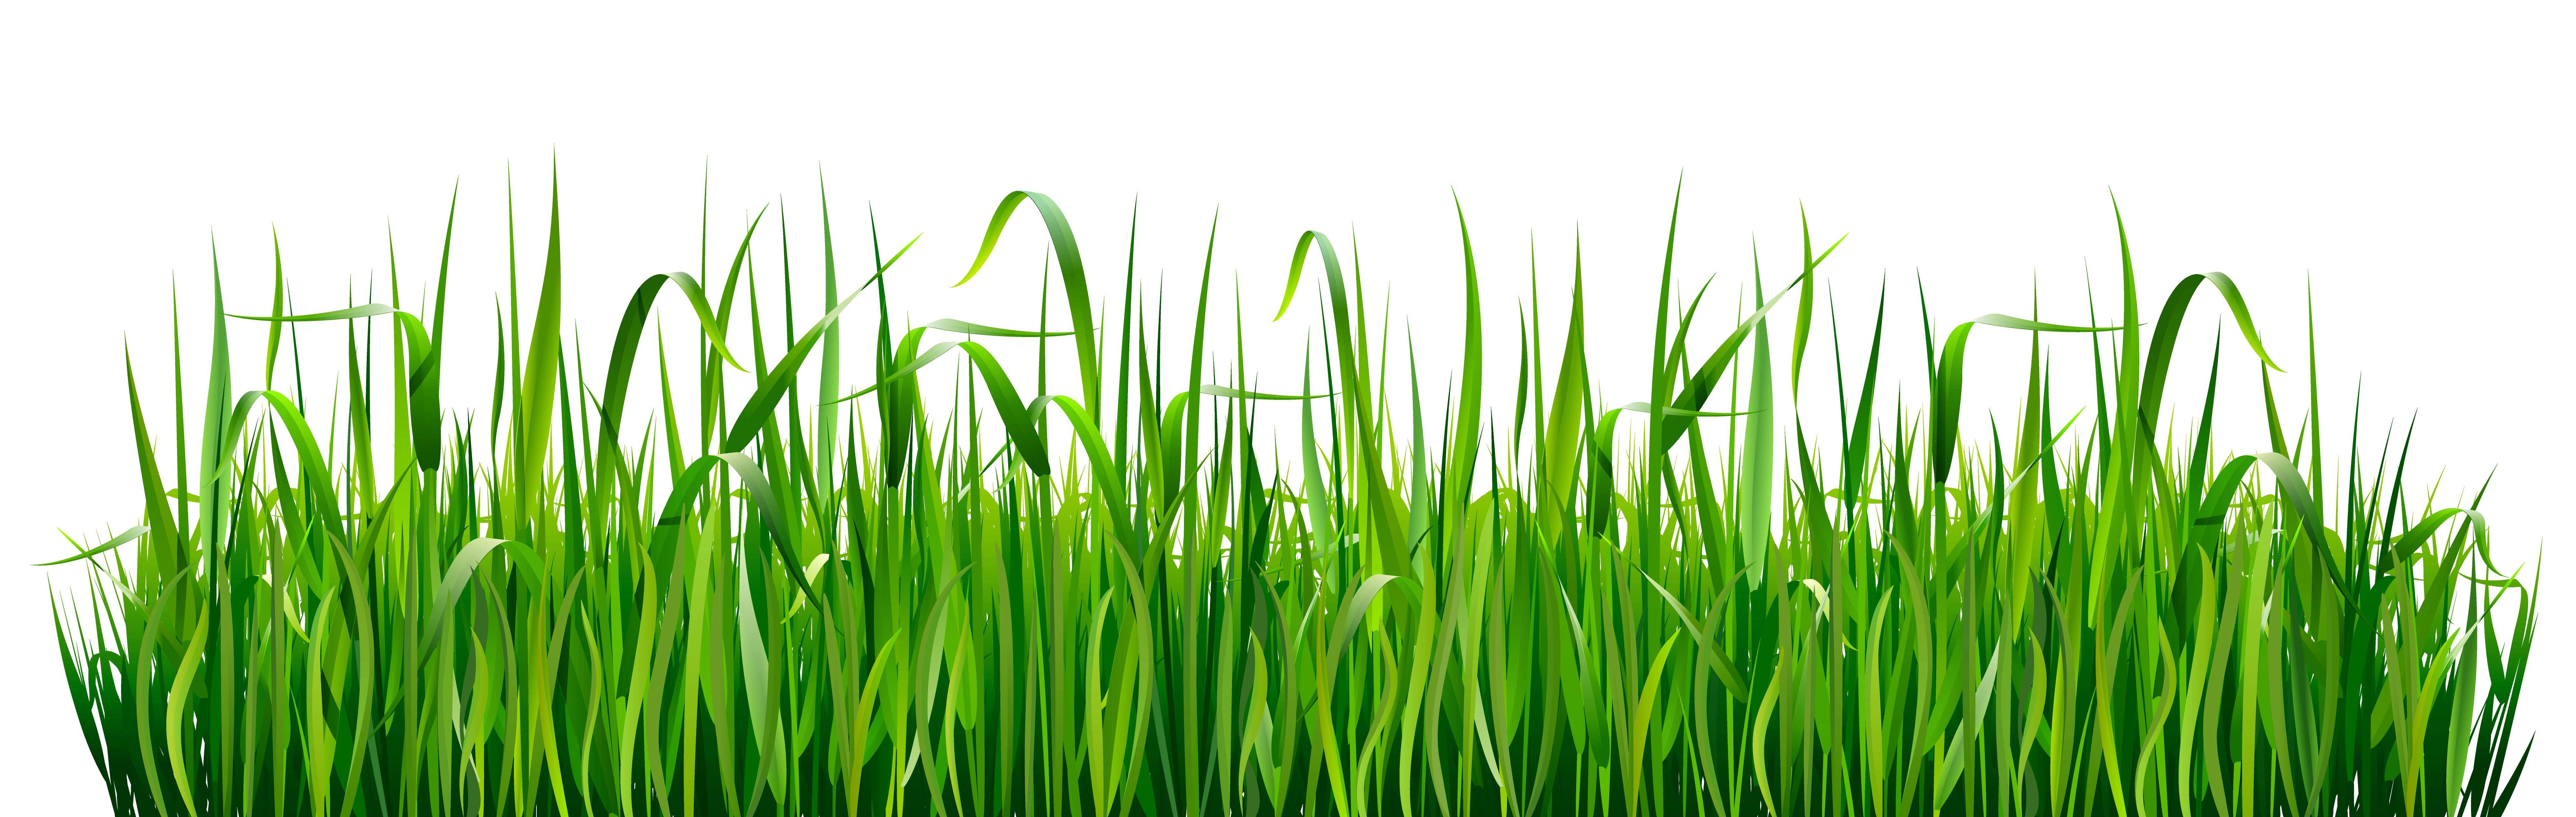 6 Types of Low-Maintenance Grasses | Perm-O-Green